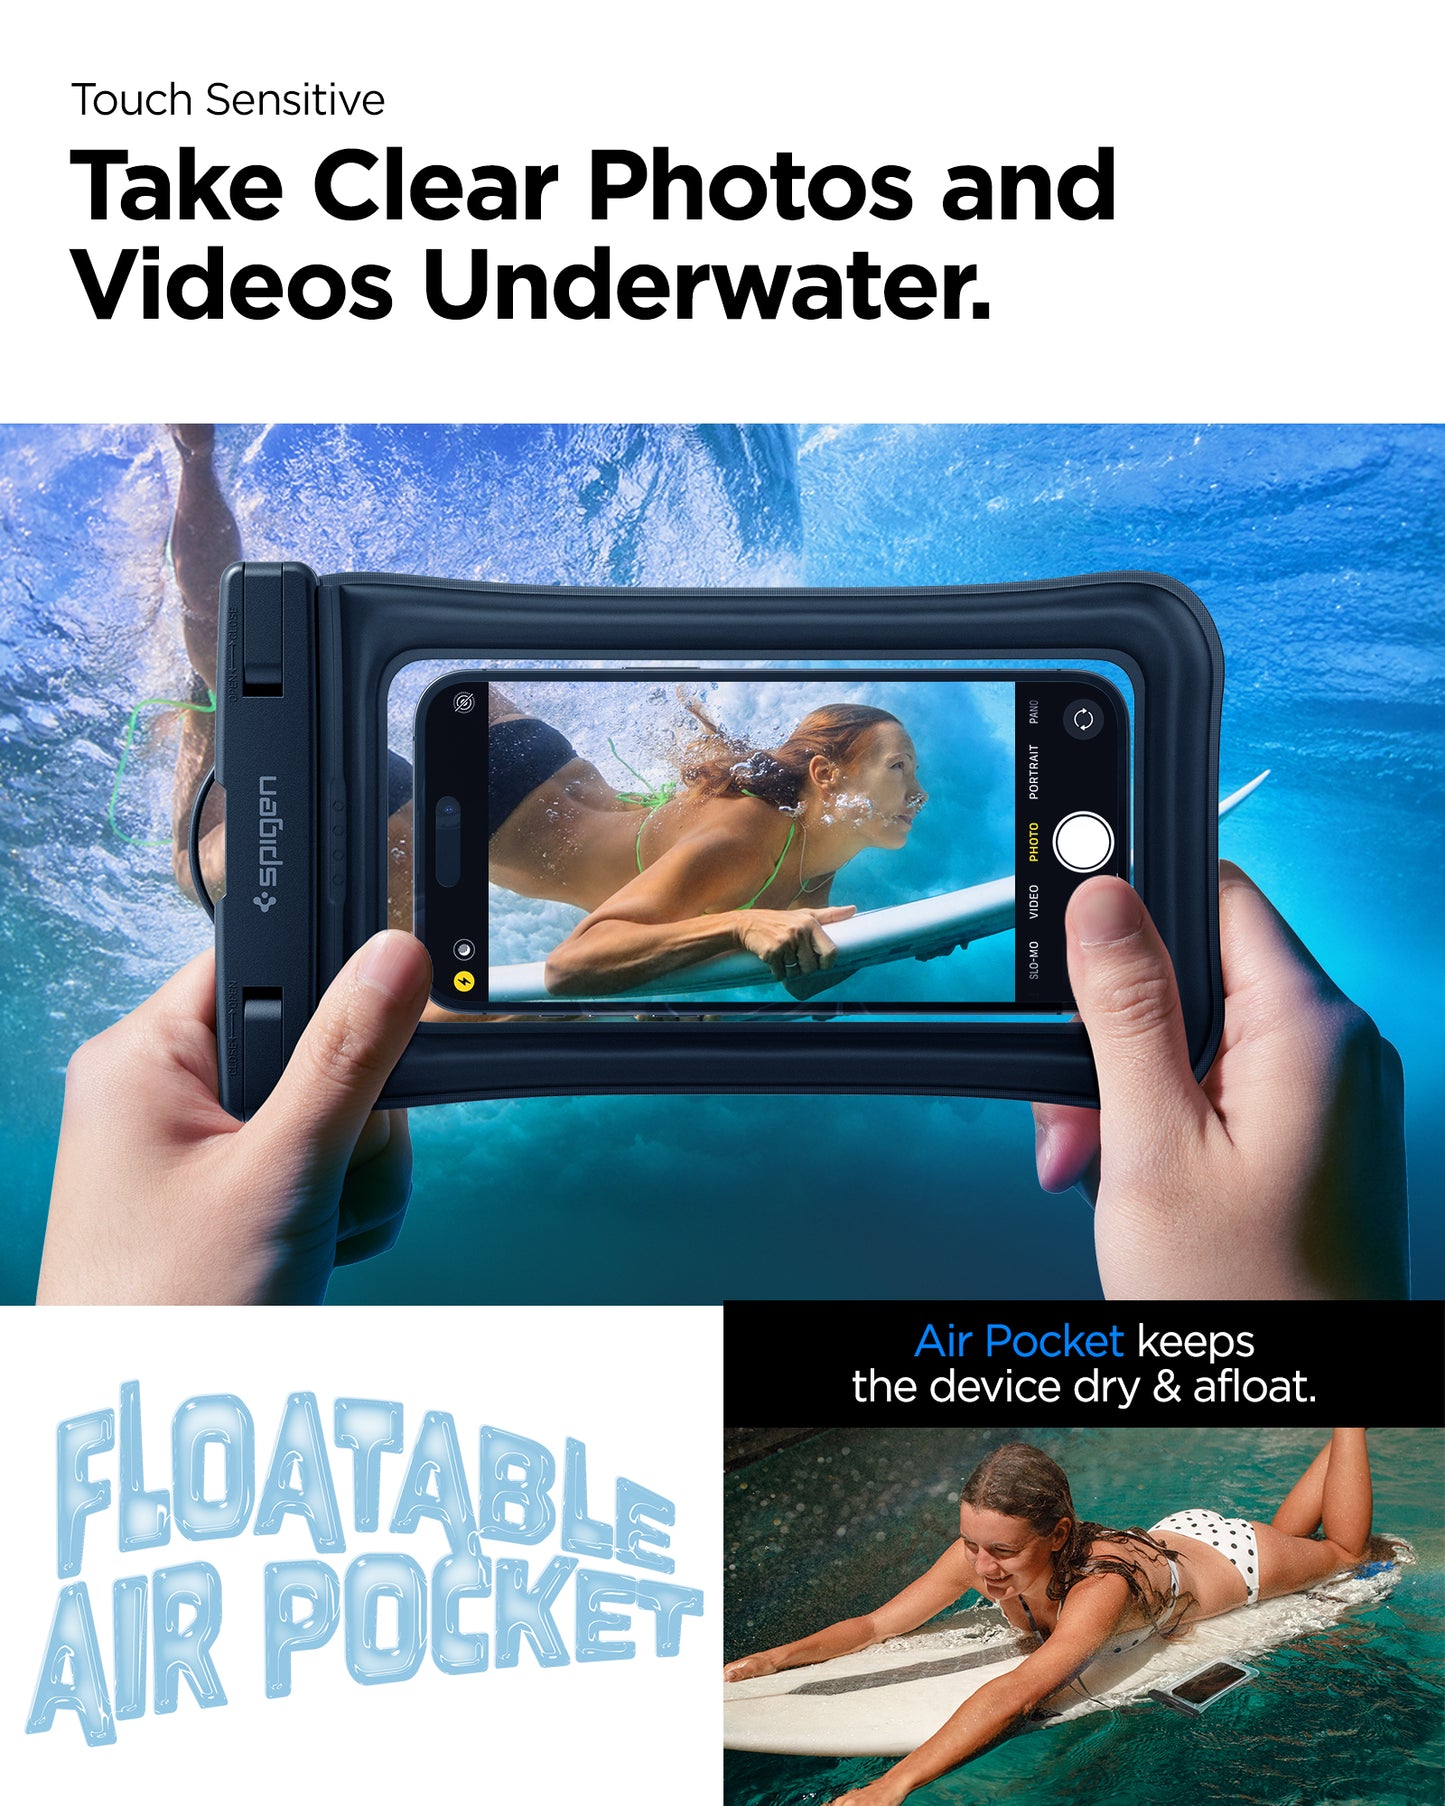 AMP04529 - AquaShield Waterproof Floating Case A610 in Black showing the touch sensitivity, can take clear photos and videos underwater,, air pocket keeps the device dry and afloat